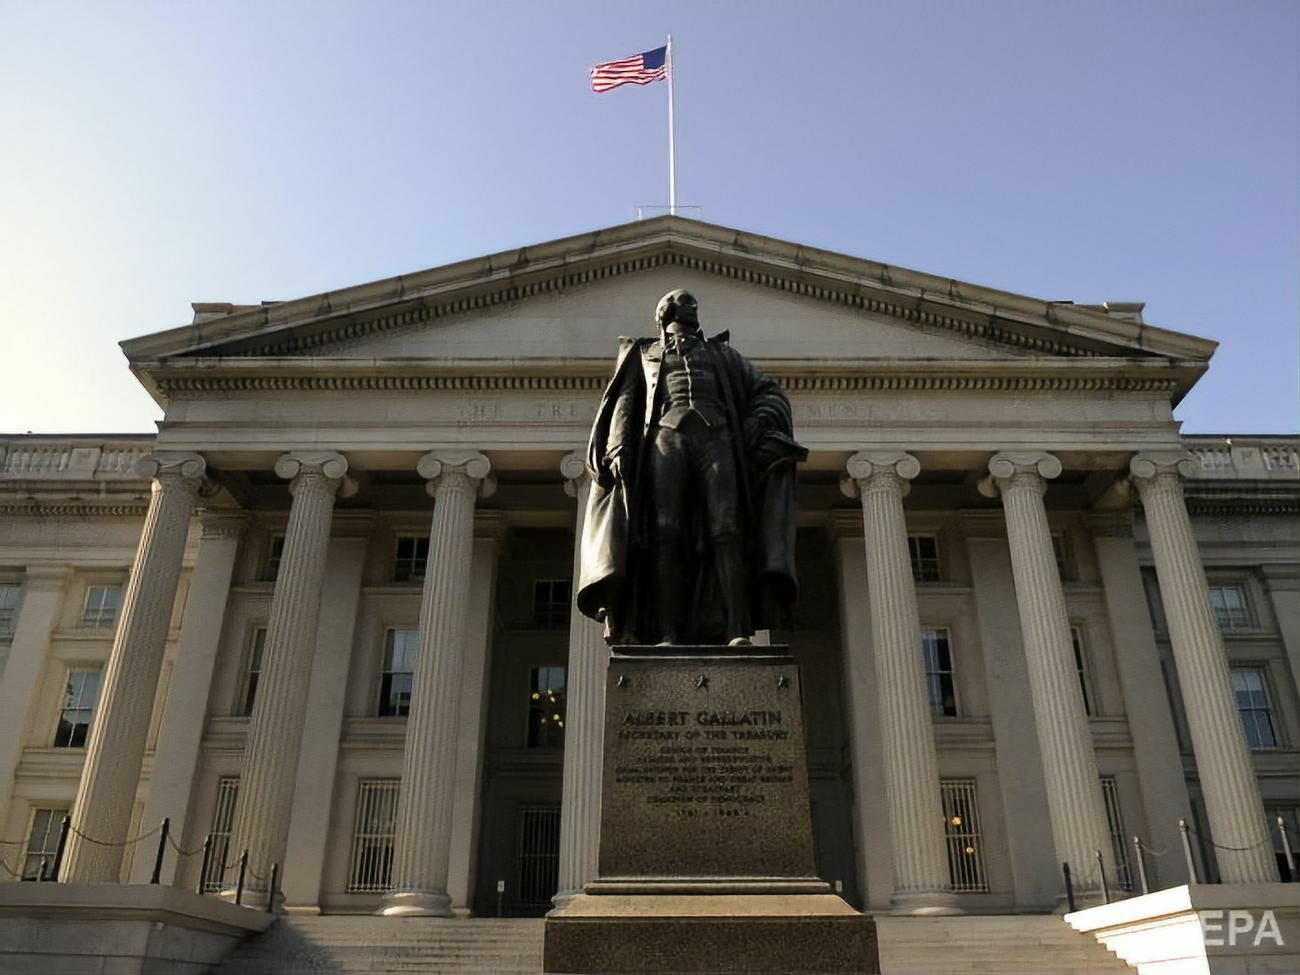 The United States officially recognized the Russian economy as non-market